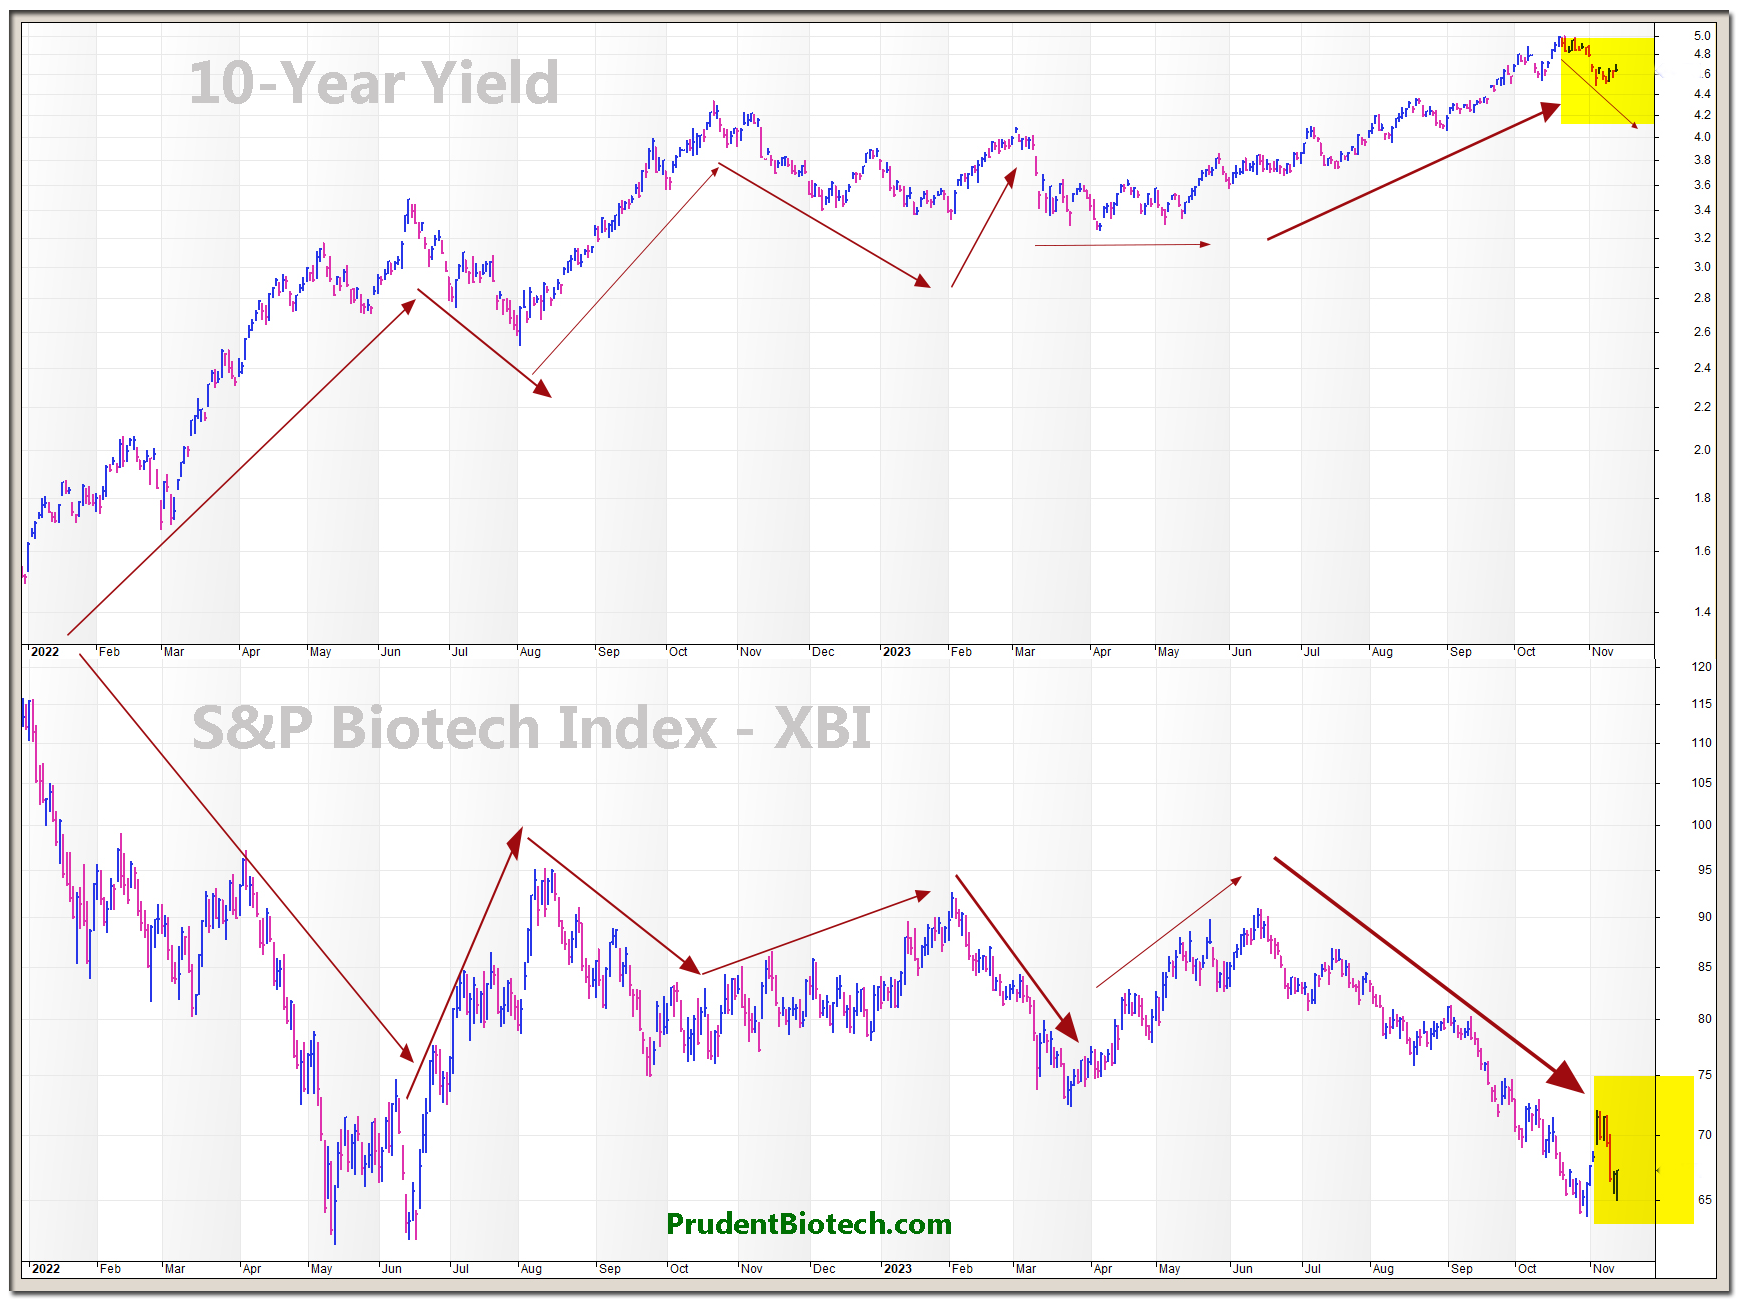 Correlation between 10-Year Bond Yield and the S&P Biotechnology Index